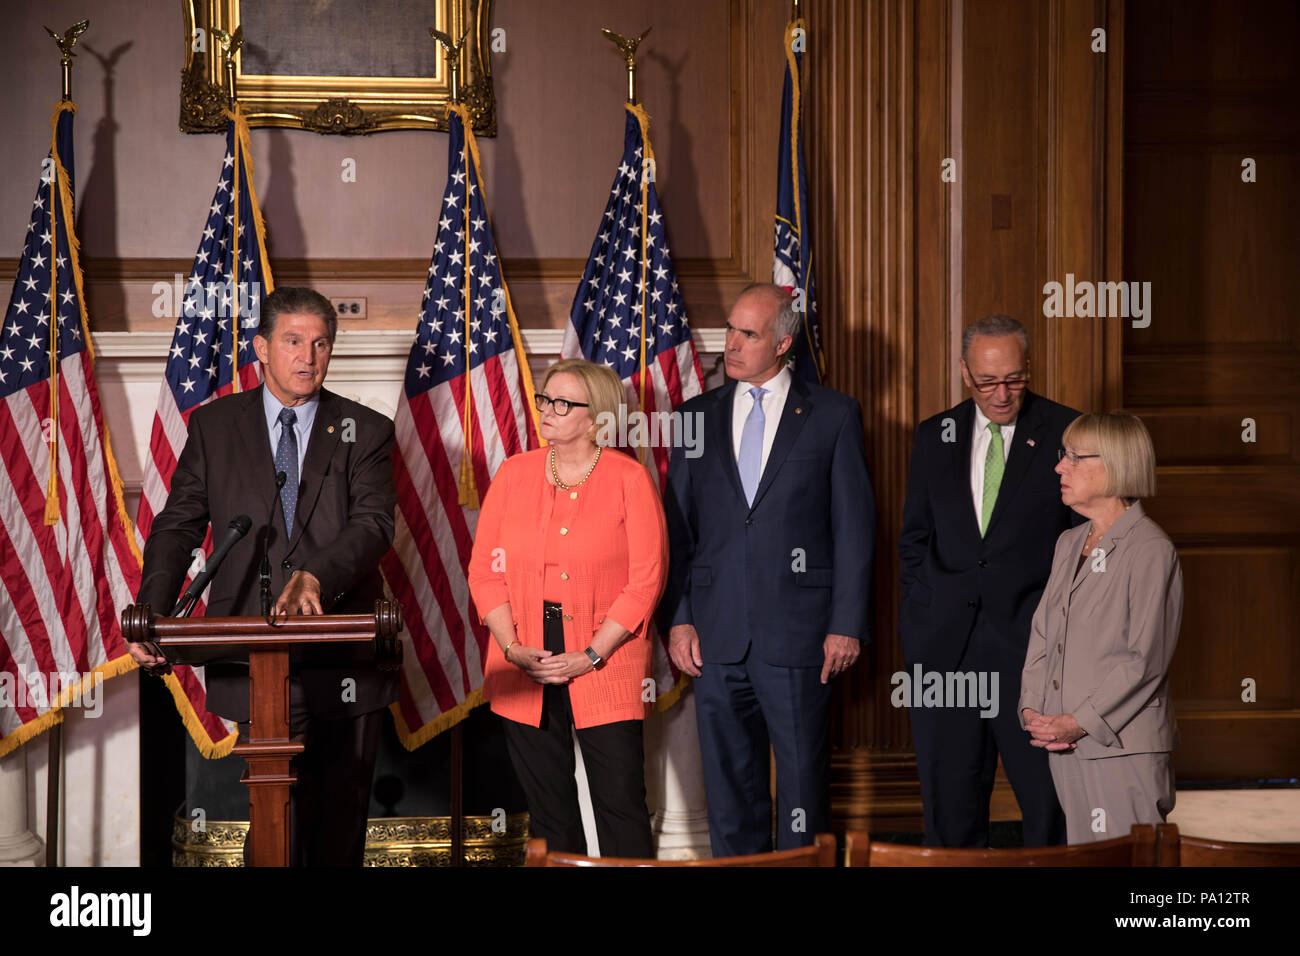 Washington DC, USA. 19th July, 2018. U.S. Senator Joe Manchin of West Virginia, joined by fellow democrats, calls for protecting pre-existing conditions in health insurance policies during a news conference on Capitol Hill July 19, 2018 in Washington, D.C. Standing from left to right are: Sen. Joe Manchin, Sen. Claire McCaskill, Sen. Bob Casey, Minority Leader Chuck Schumer and Sen. Patty Murray. Credit: Planetpix/Alamy Live News Stock Photo